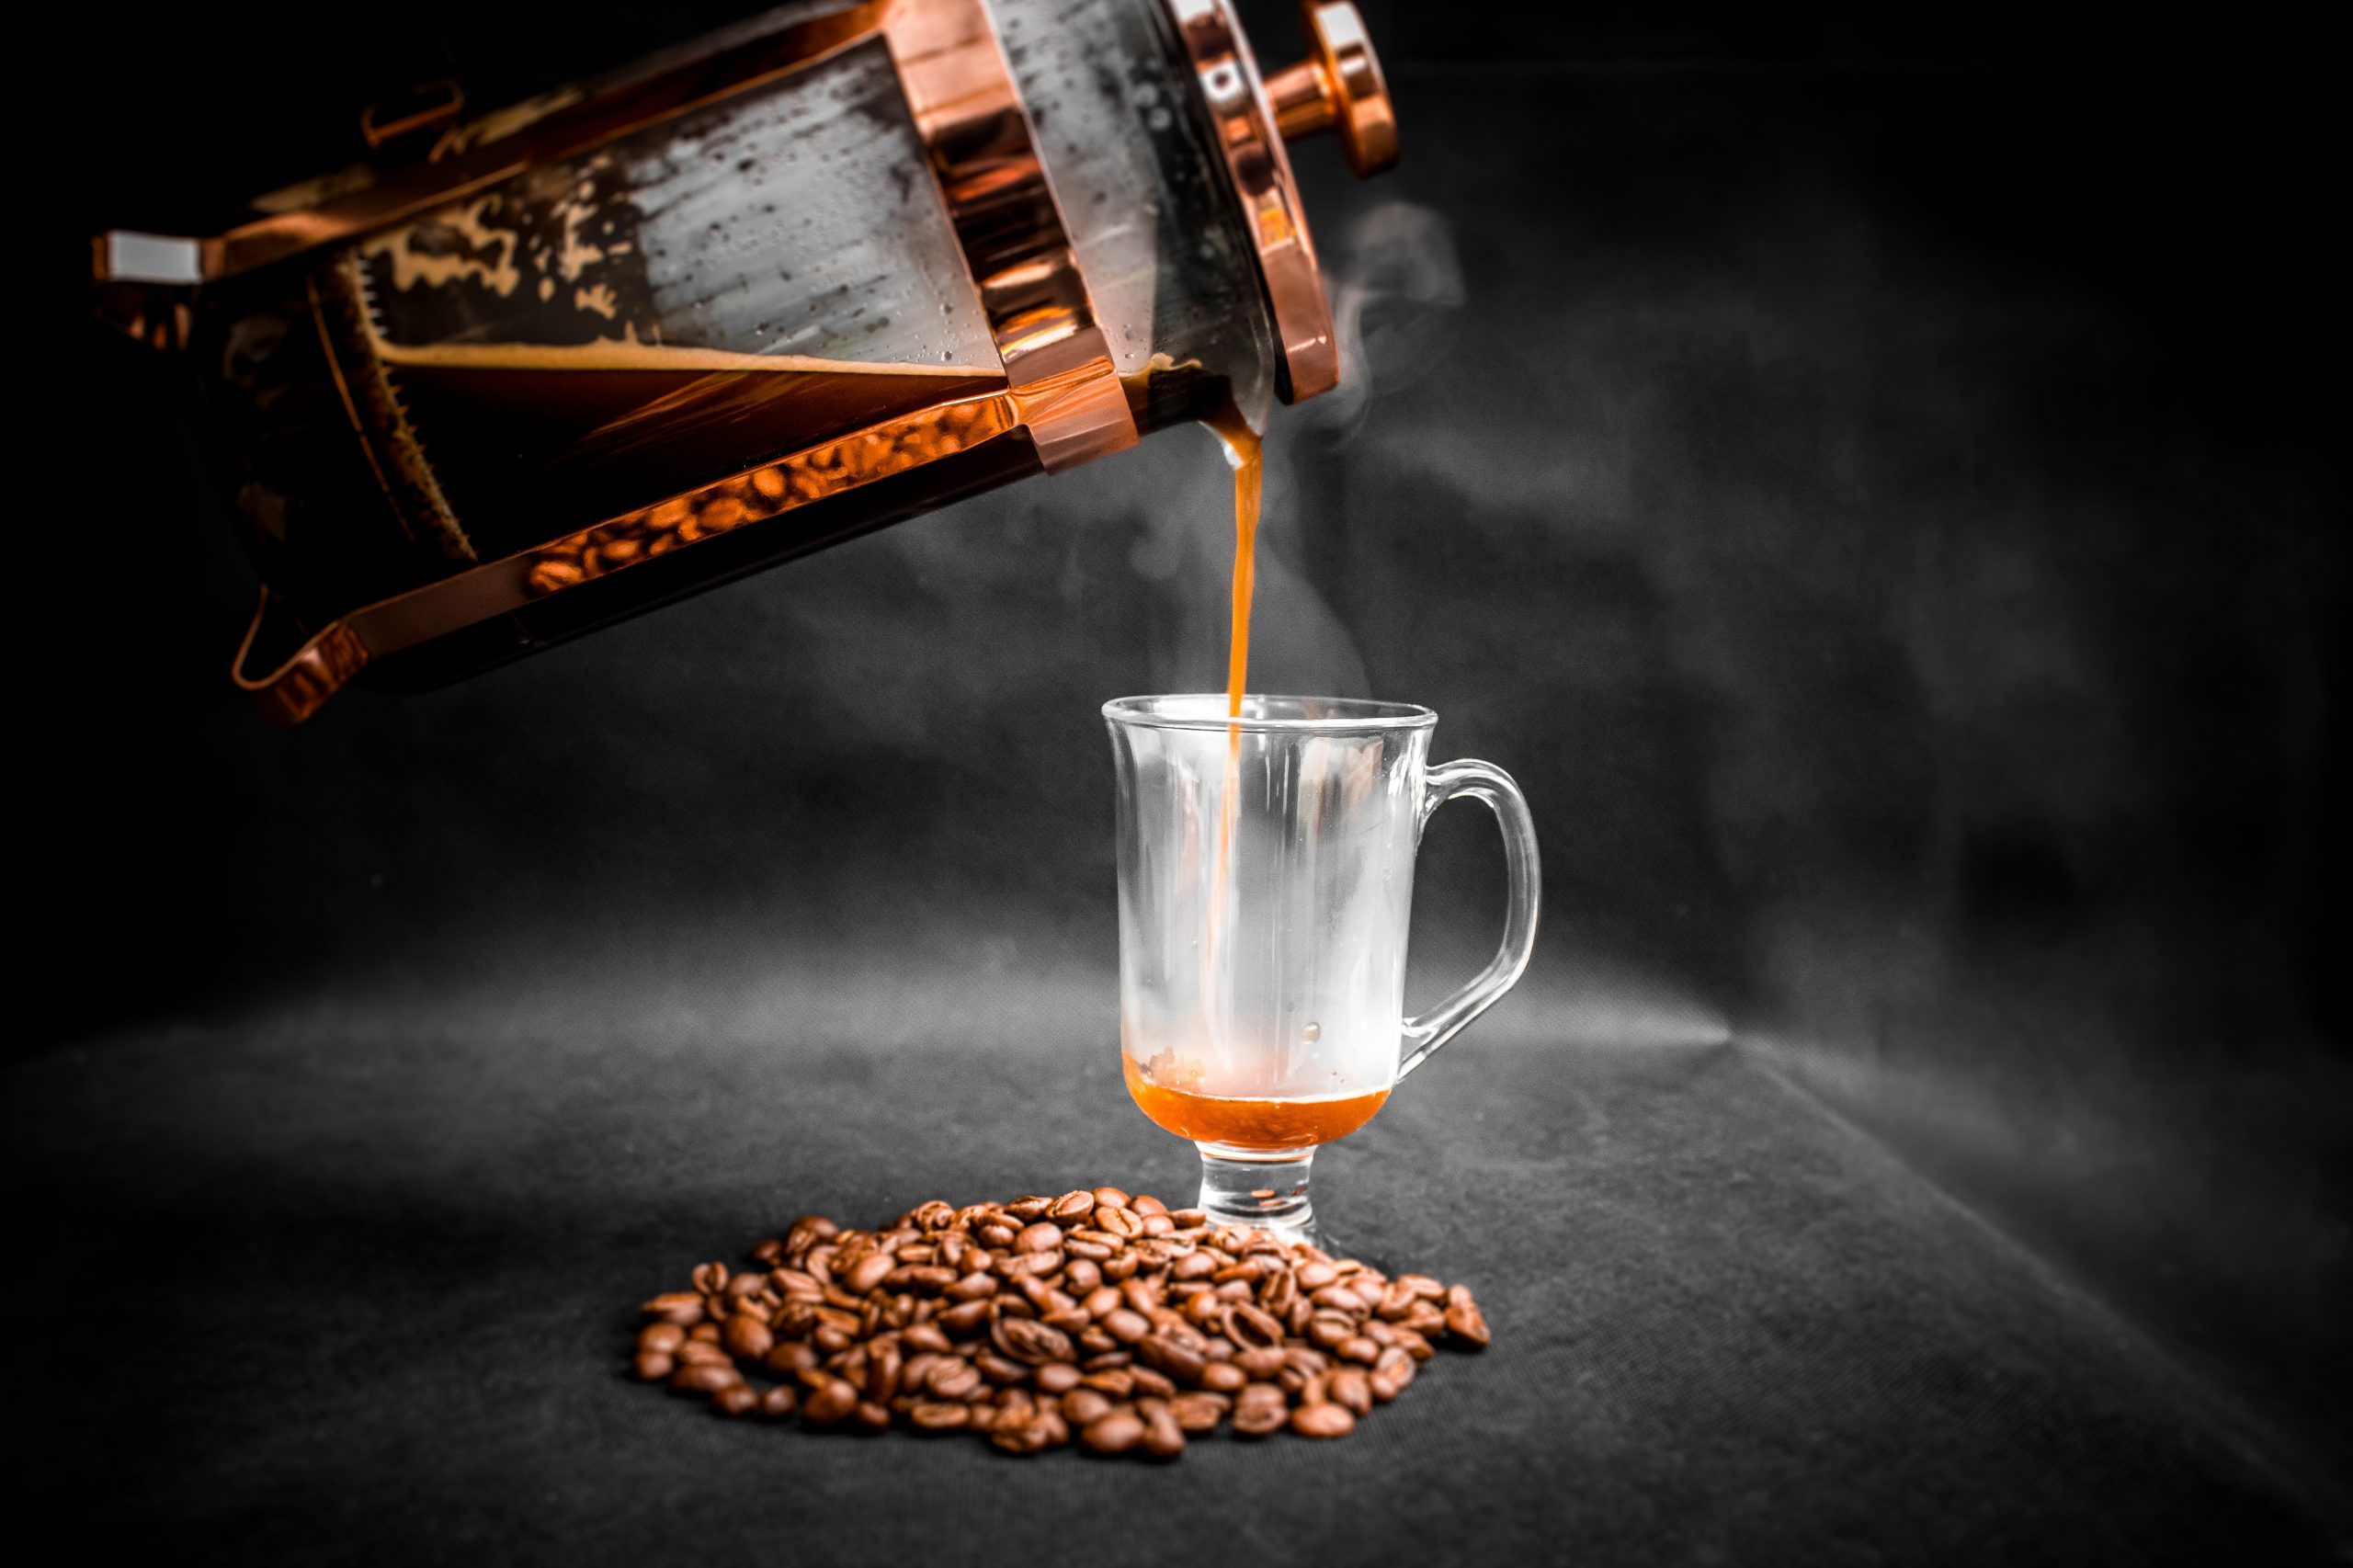 Optimizing Quality Control with Digital Logsheets
Photo by Georgi Petrov: https://www.pexels.com/photo/coffee-being-poured-from-french-press-into-elegant-glass-872894/